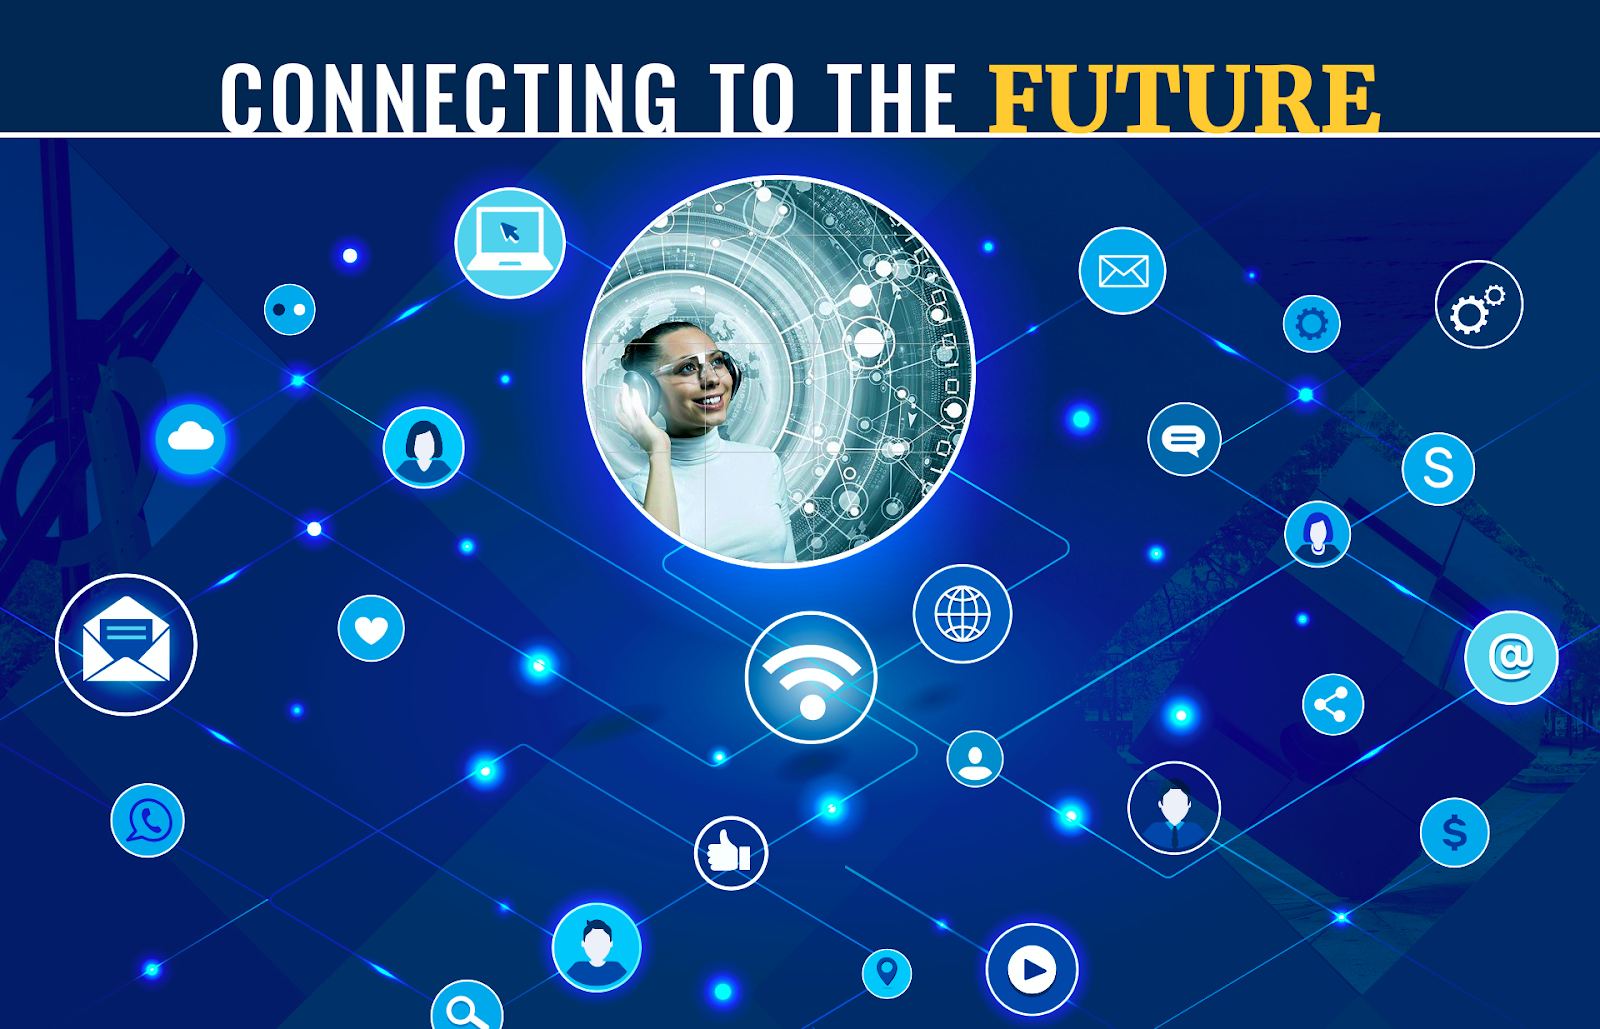 Blue Background with interconnected circles with photos of futuristic images headline “Connecting to the Future”